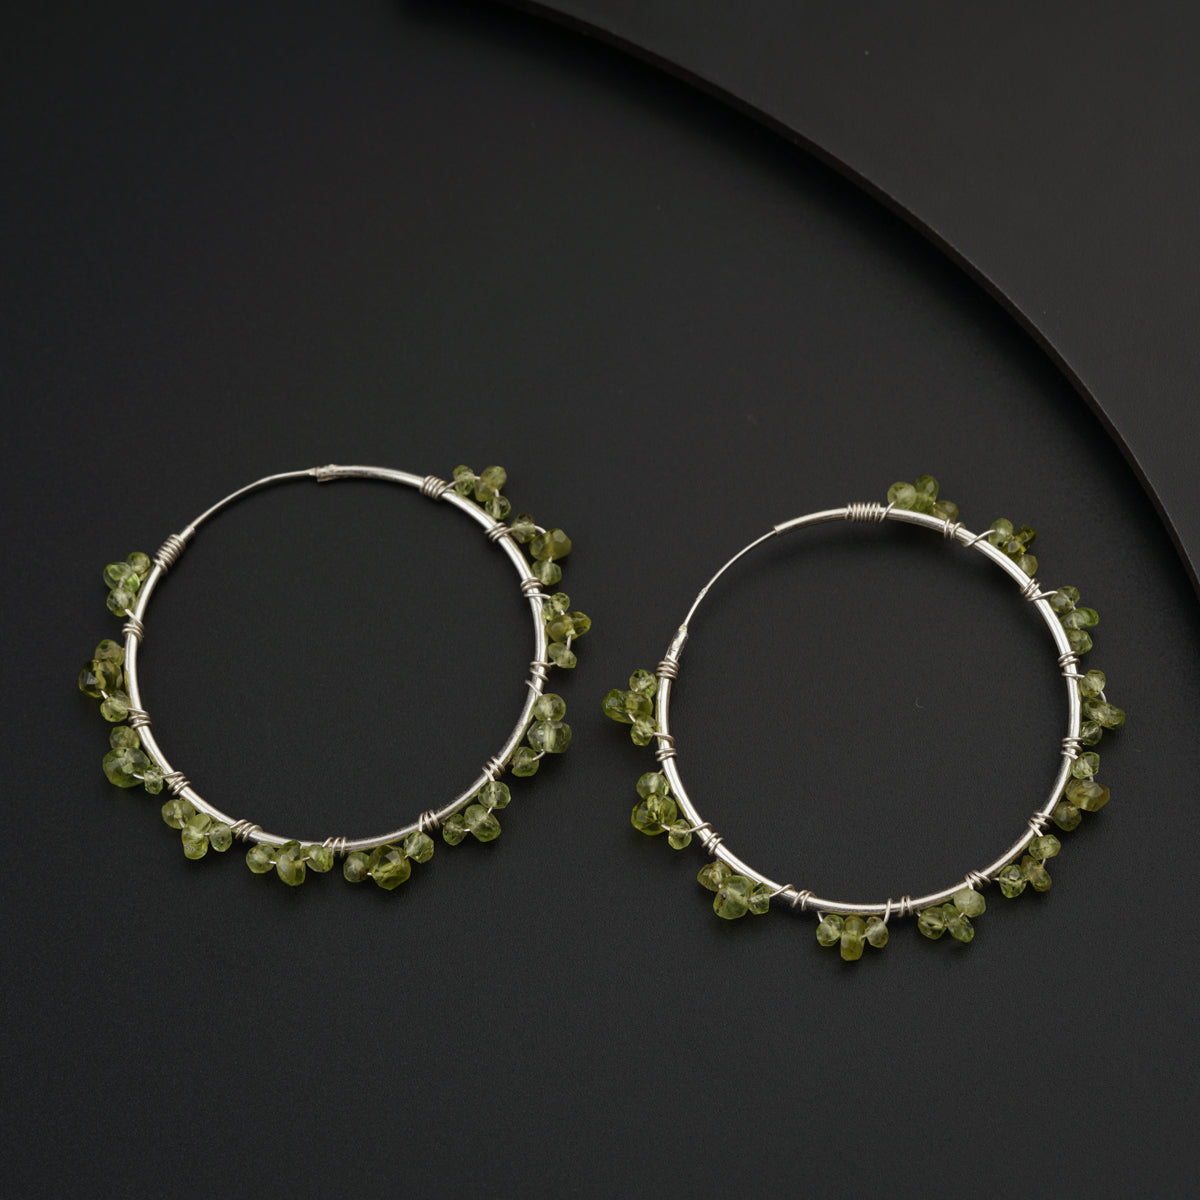 a pair of silver hoop earrings with green beads